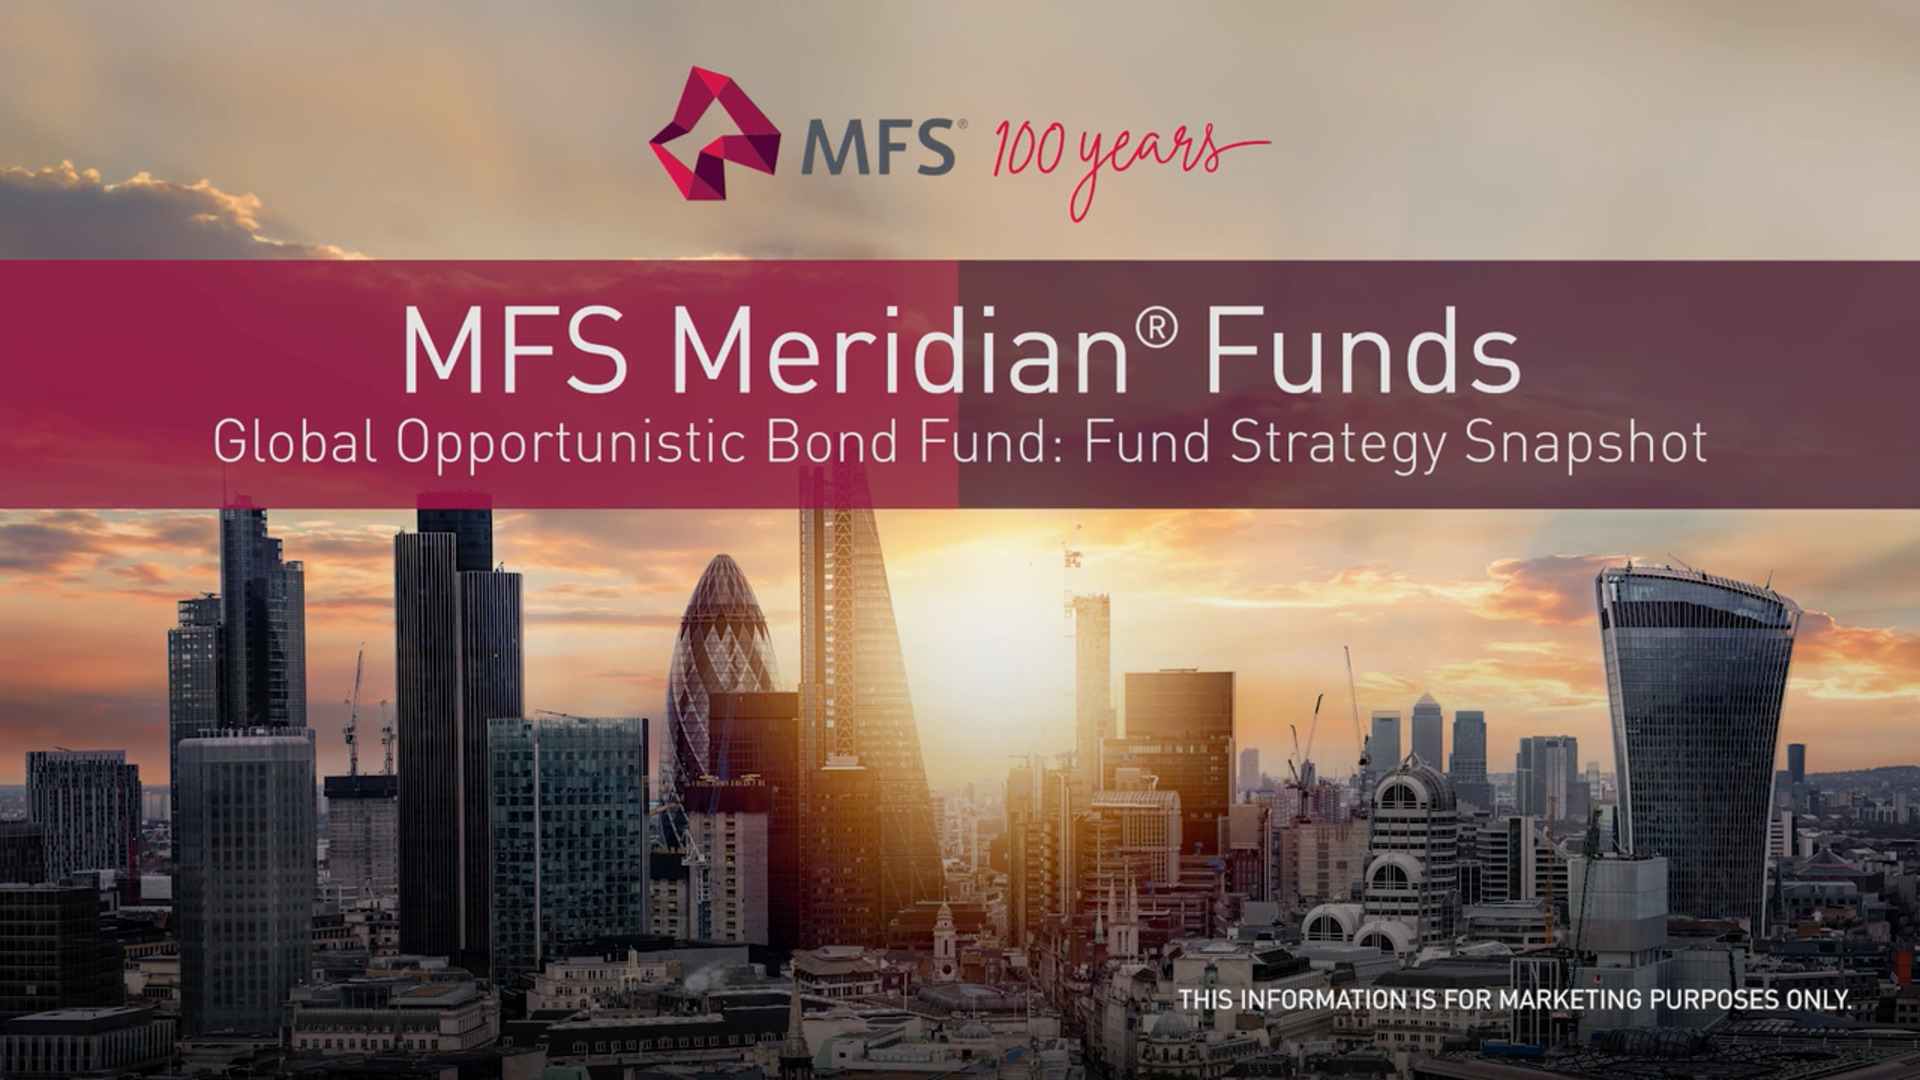 MFS Meridian® Funds – Global Opportunistic Bond Fund: Fund Strategy Snapshot